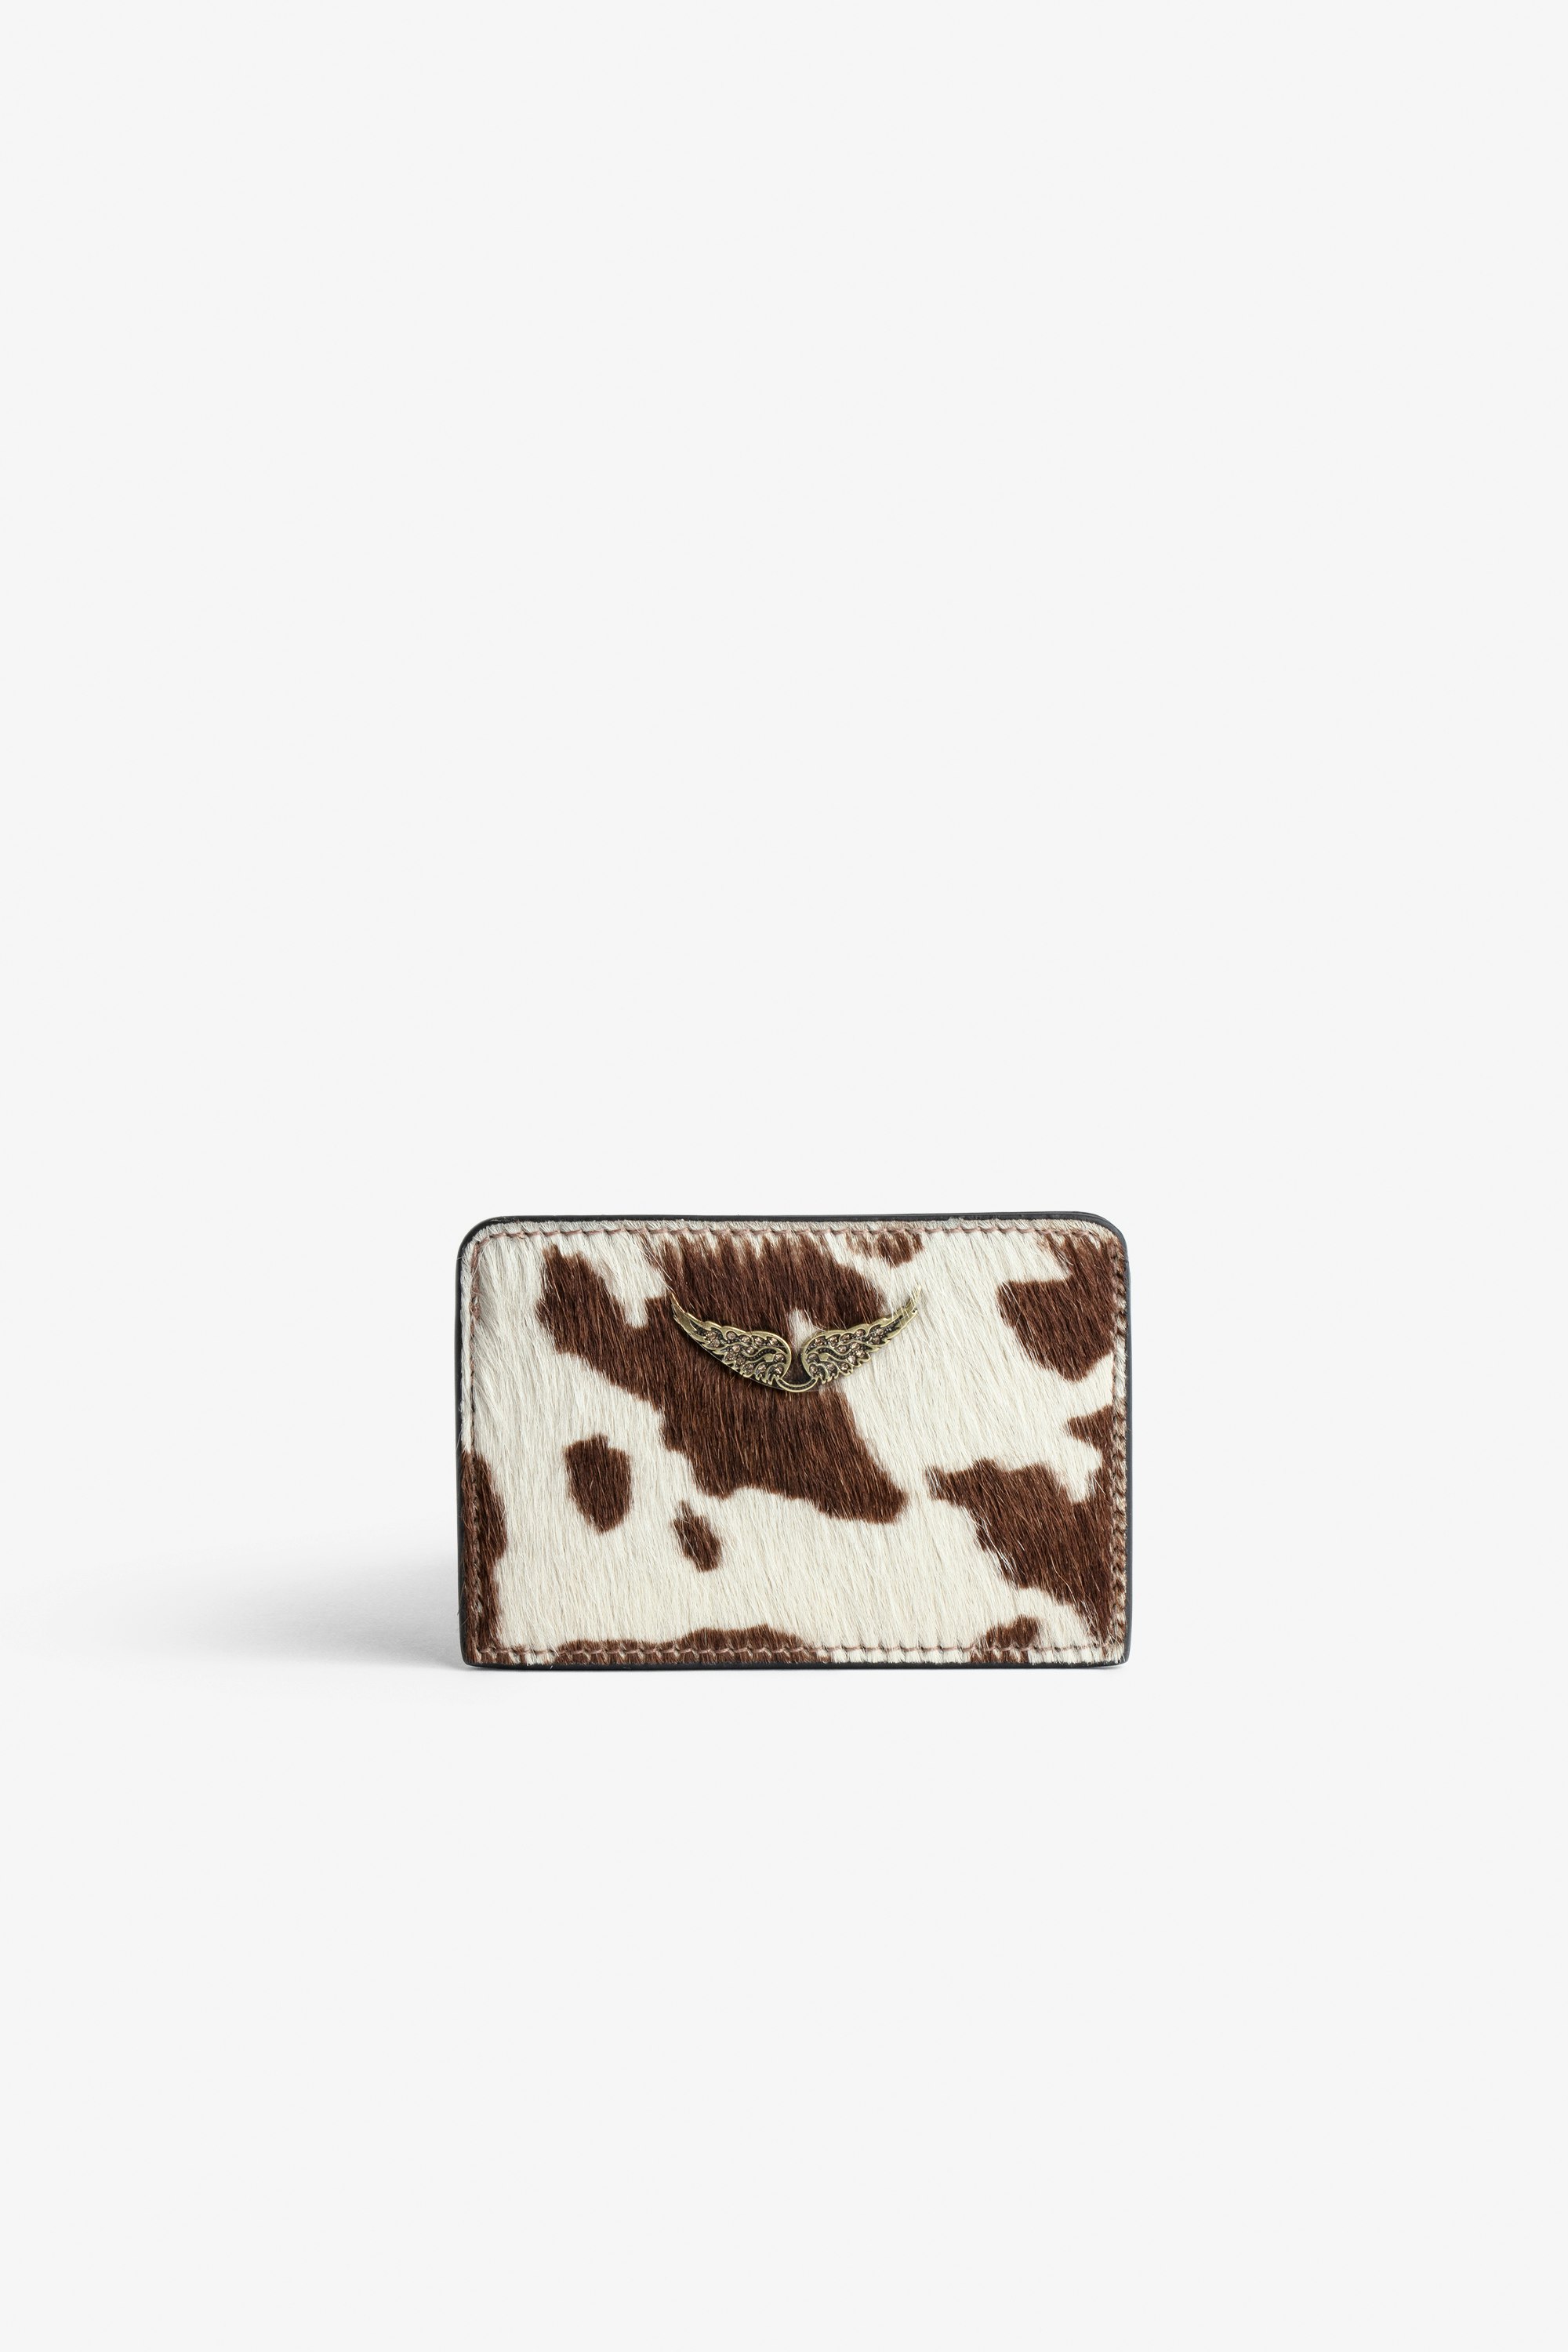 ZV Pass Card Case Women's card case in brown-and-white pony-effect leather